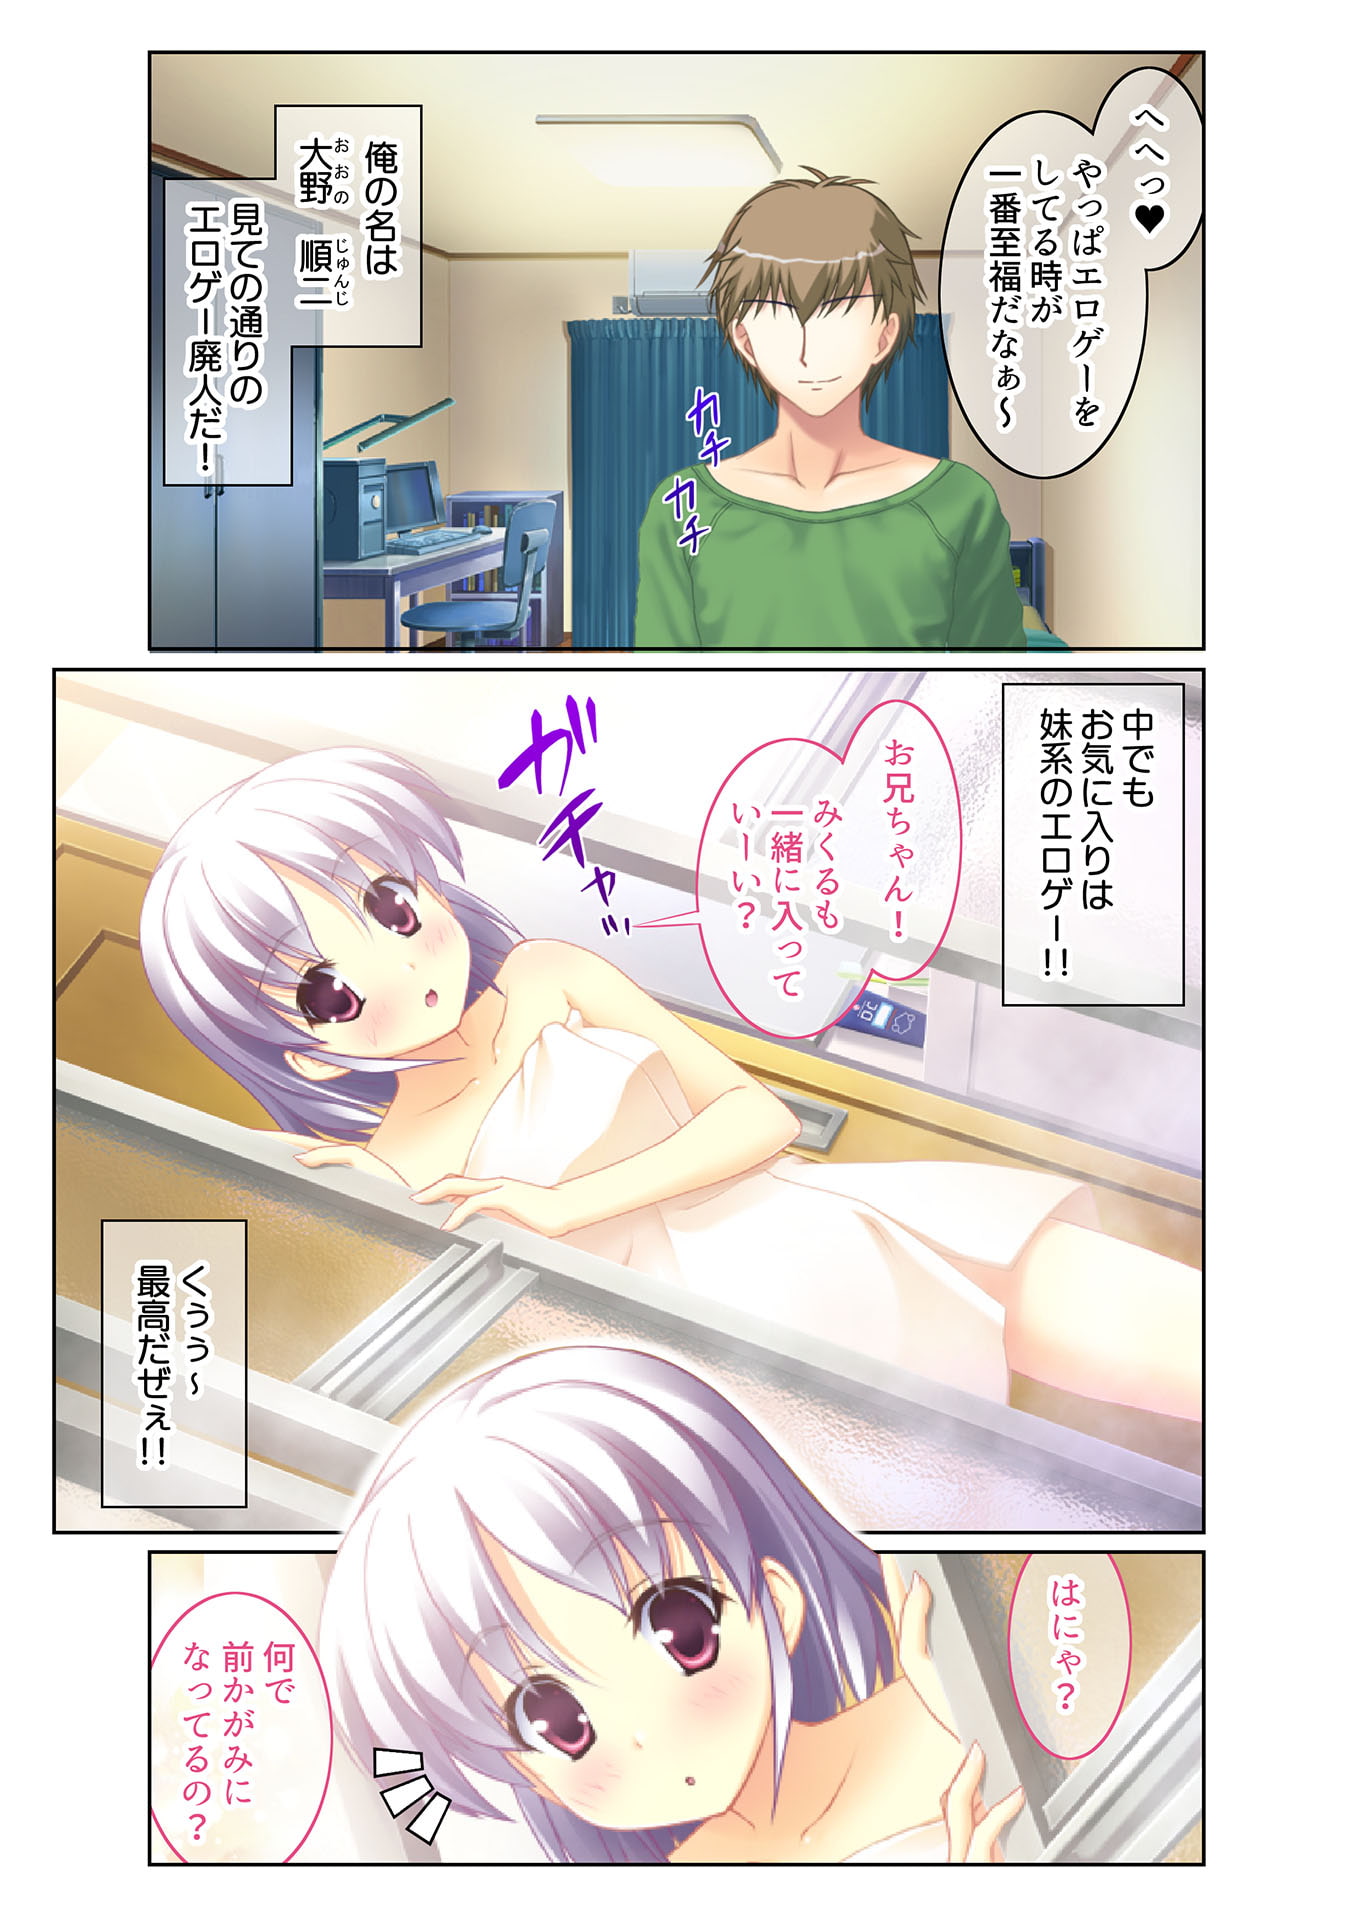 Imouto Harem ~Oniichan, let's have sex~ (1) [Full Color Comic Ver]